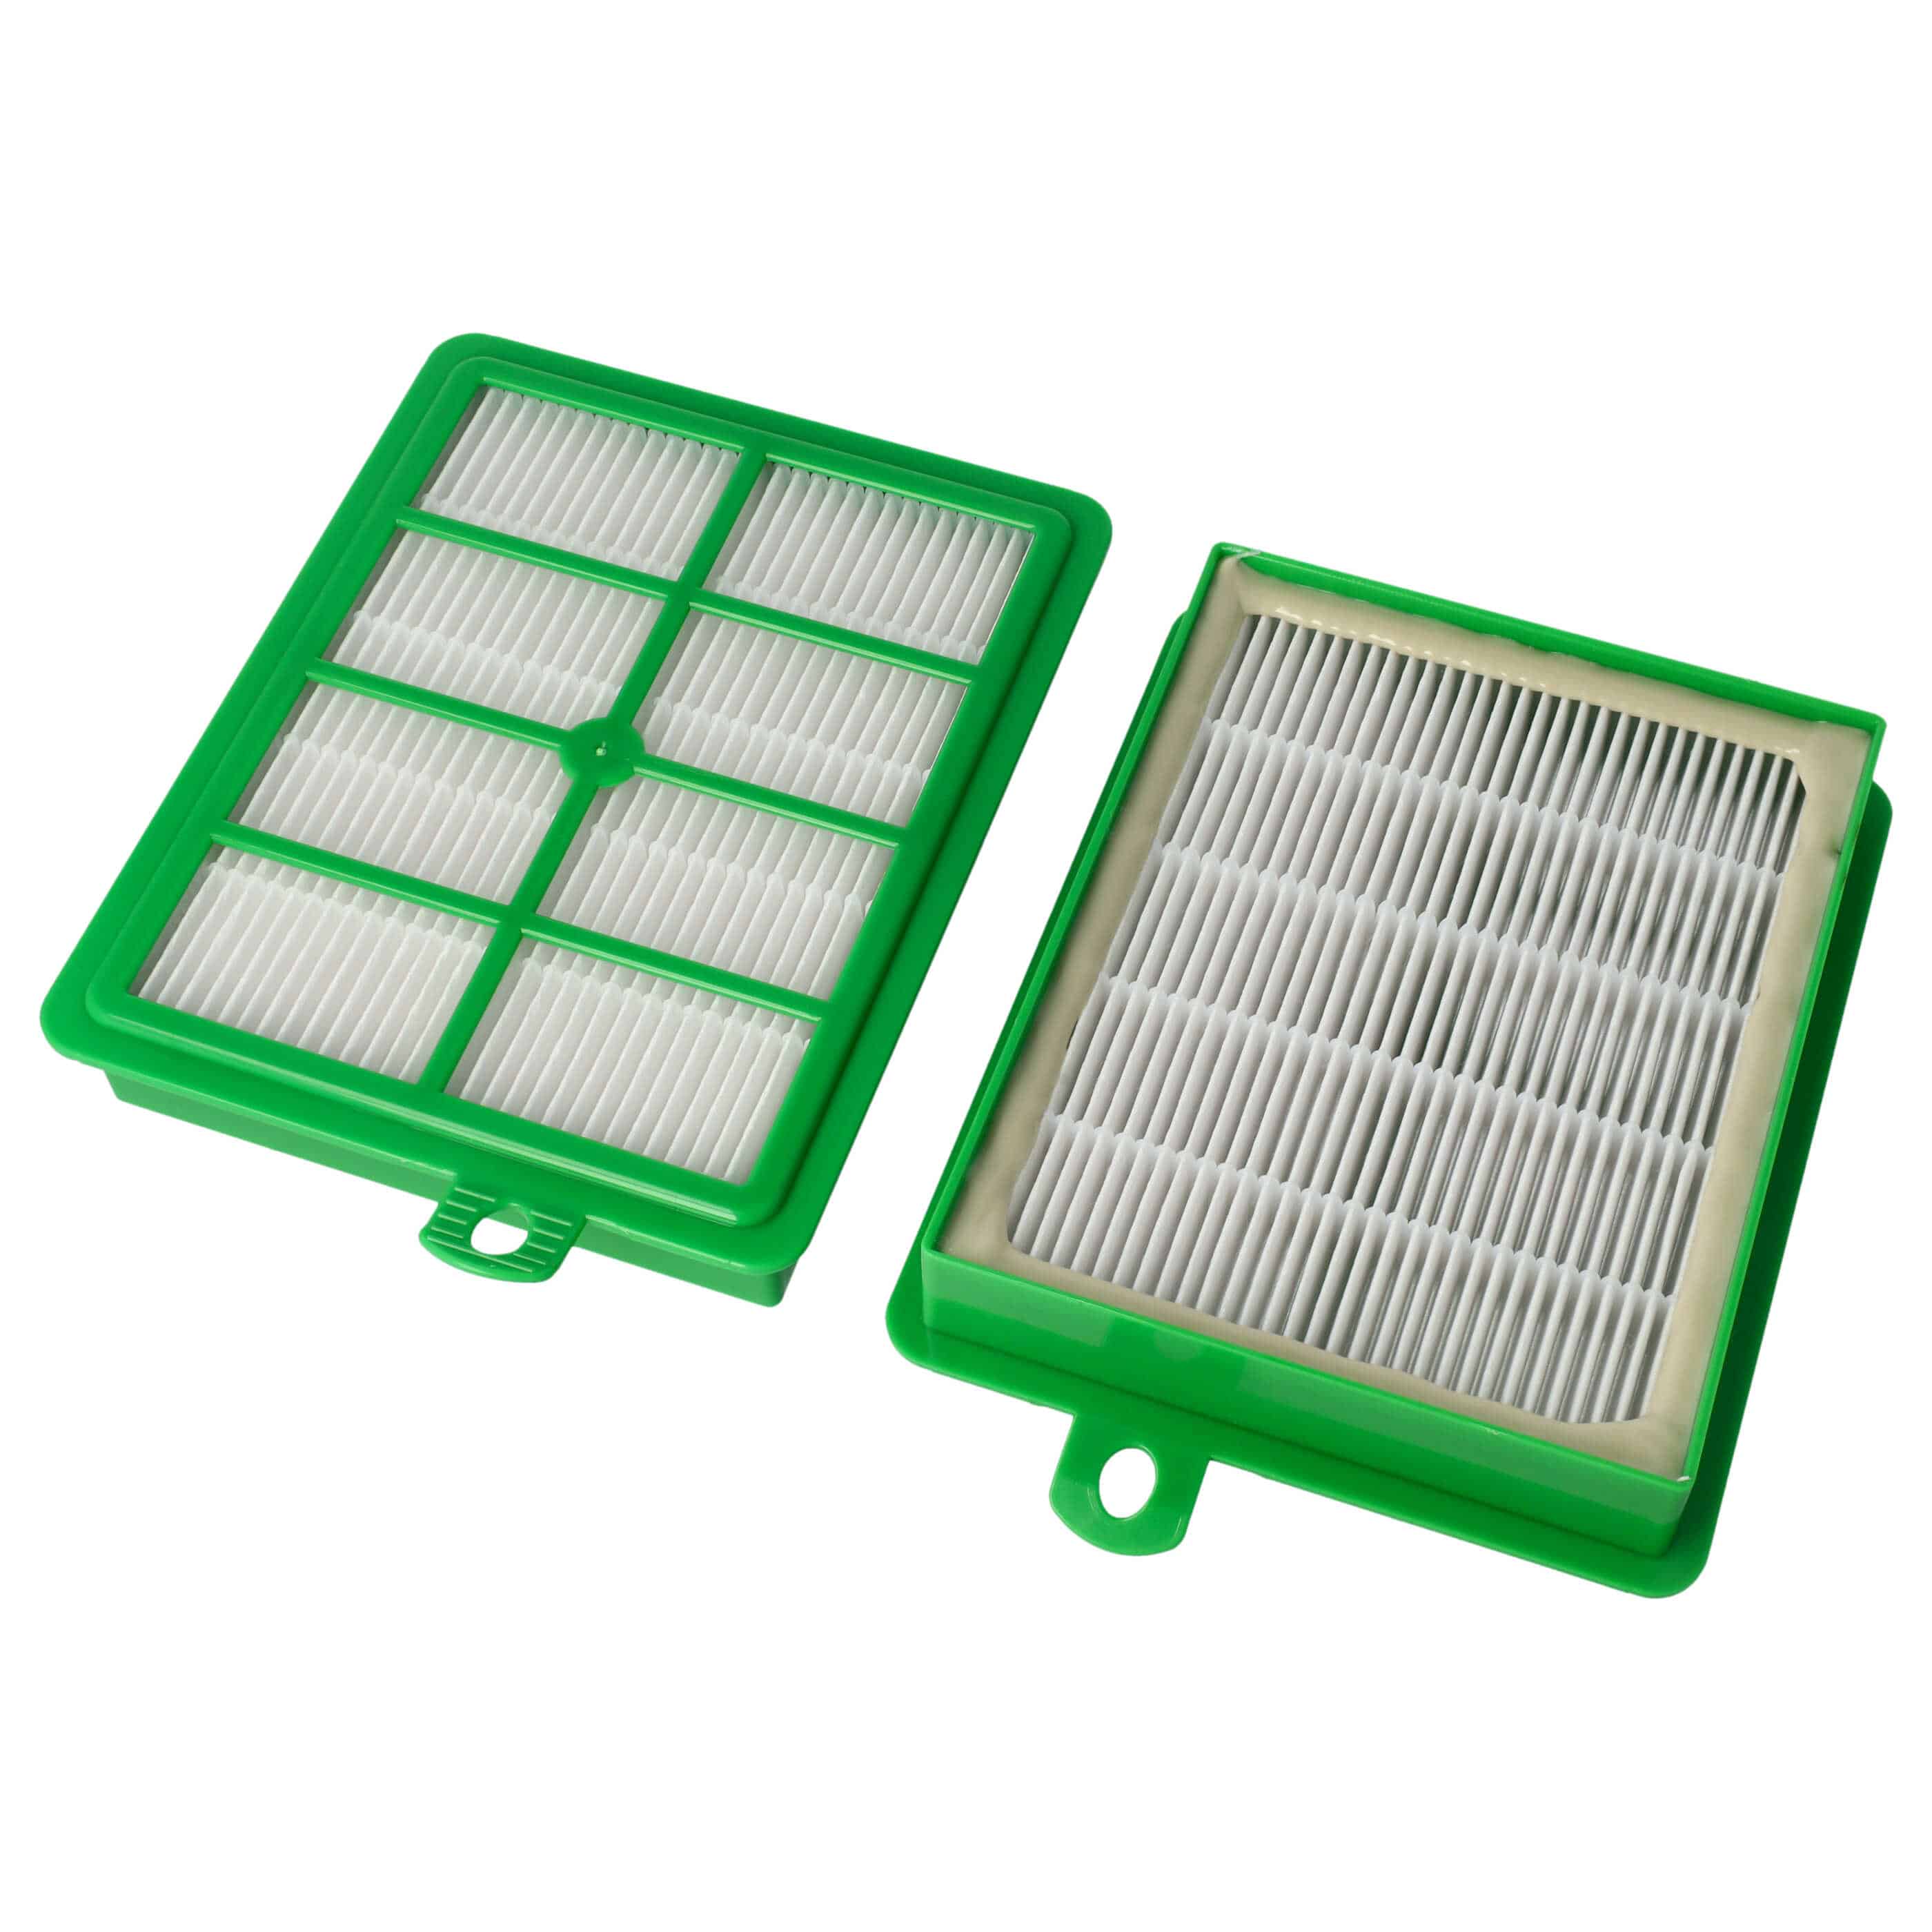 2x HEPA filter replaces AEG ASF1W, AFS1, E 12, AFS1W, AEFG12W for PhilipsVacuum Cleaner